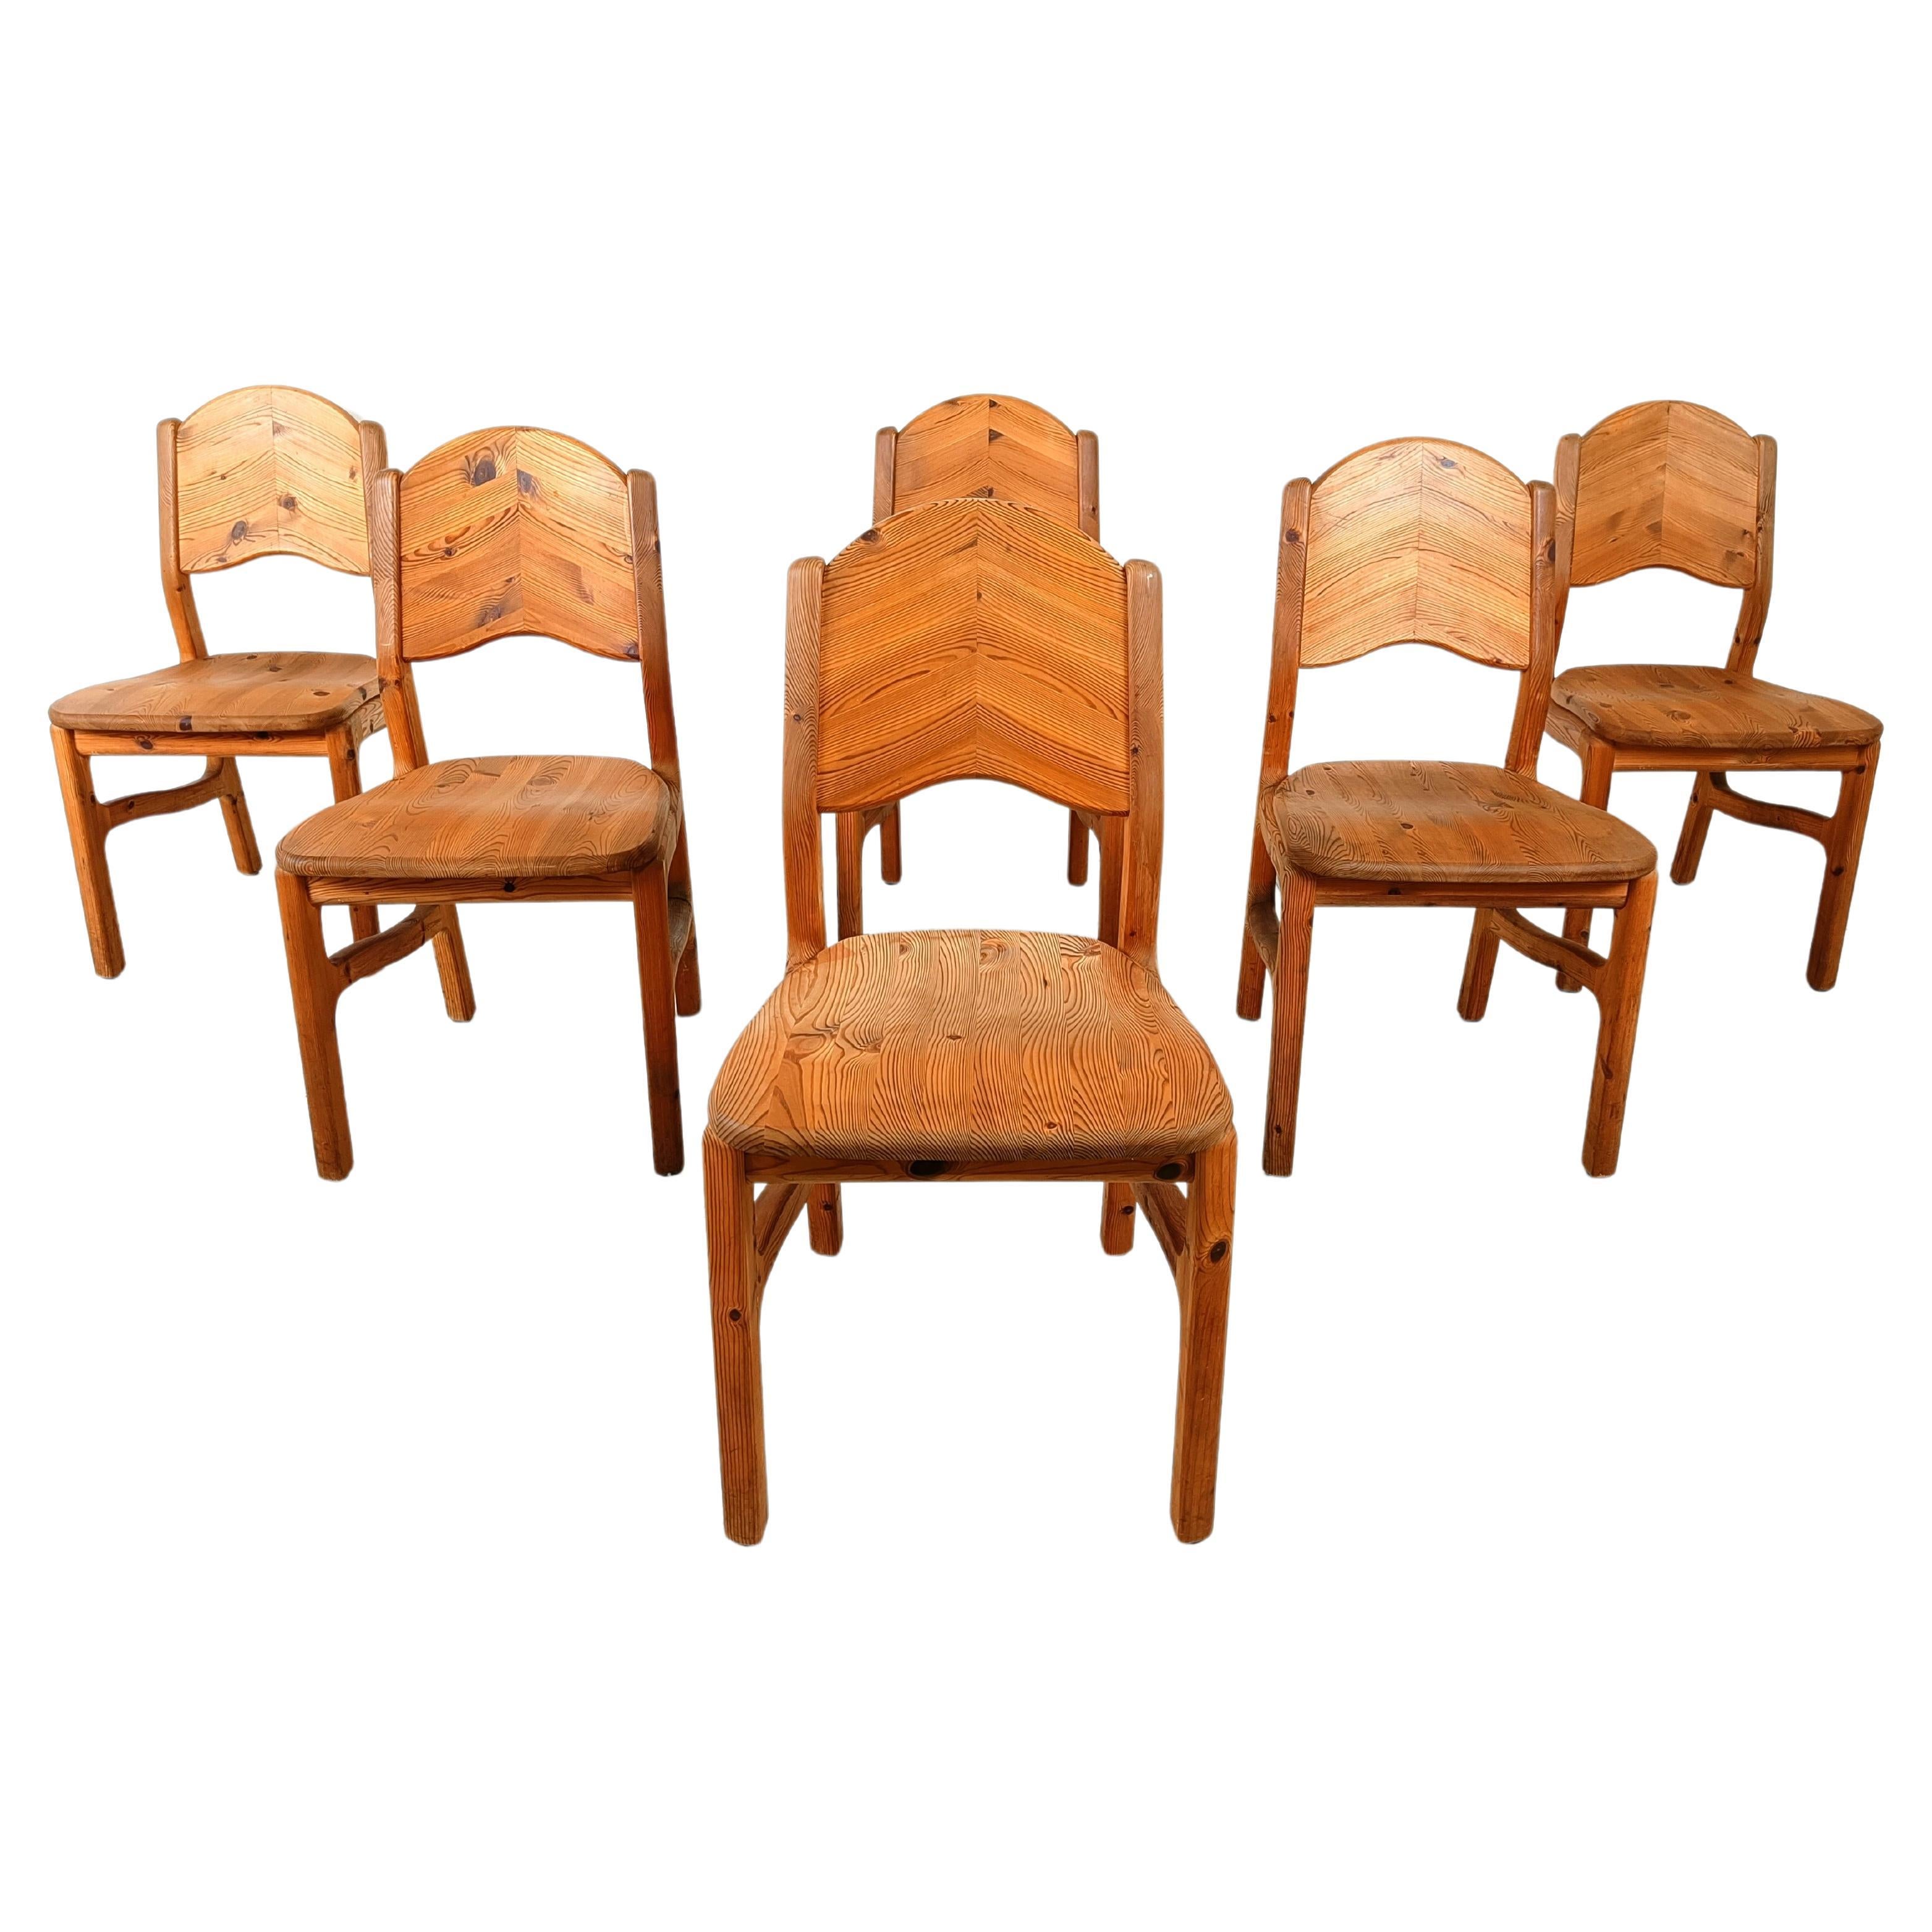 Vintage pine wood dining chairs - 1970s For Sale